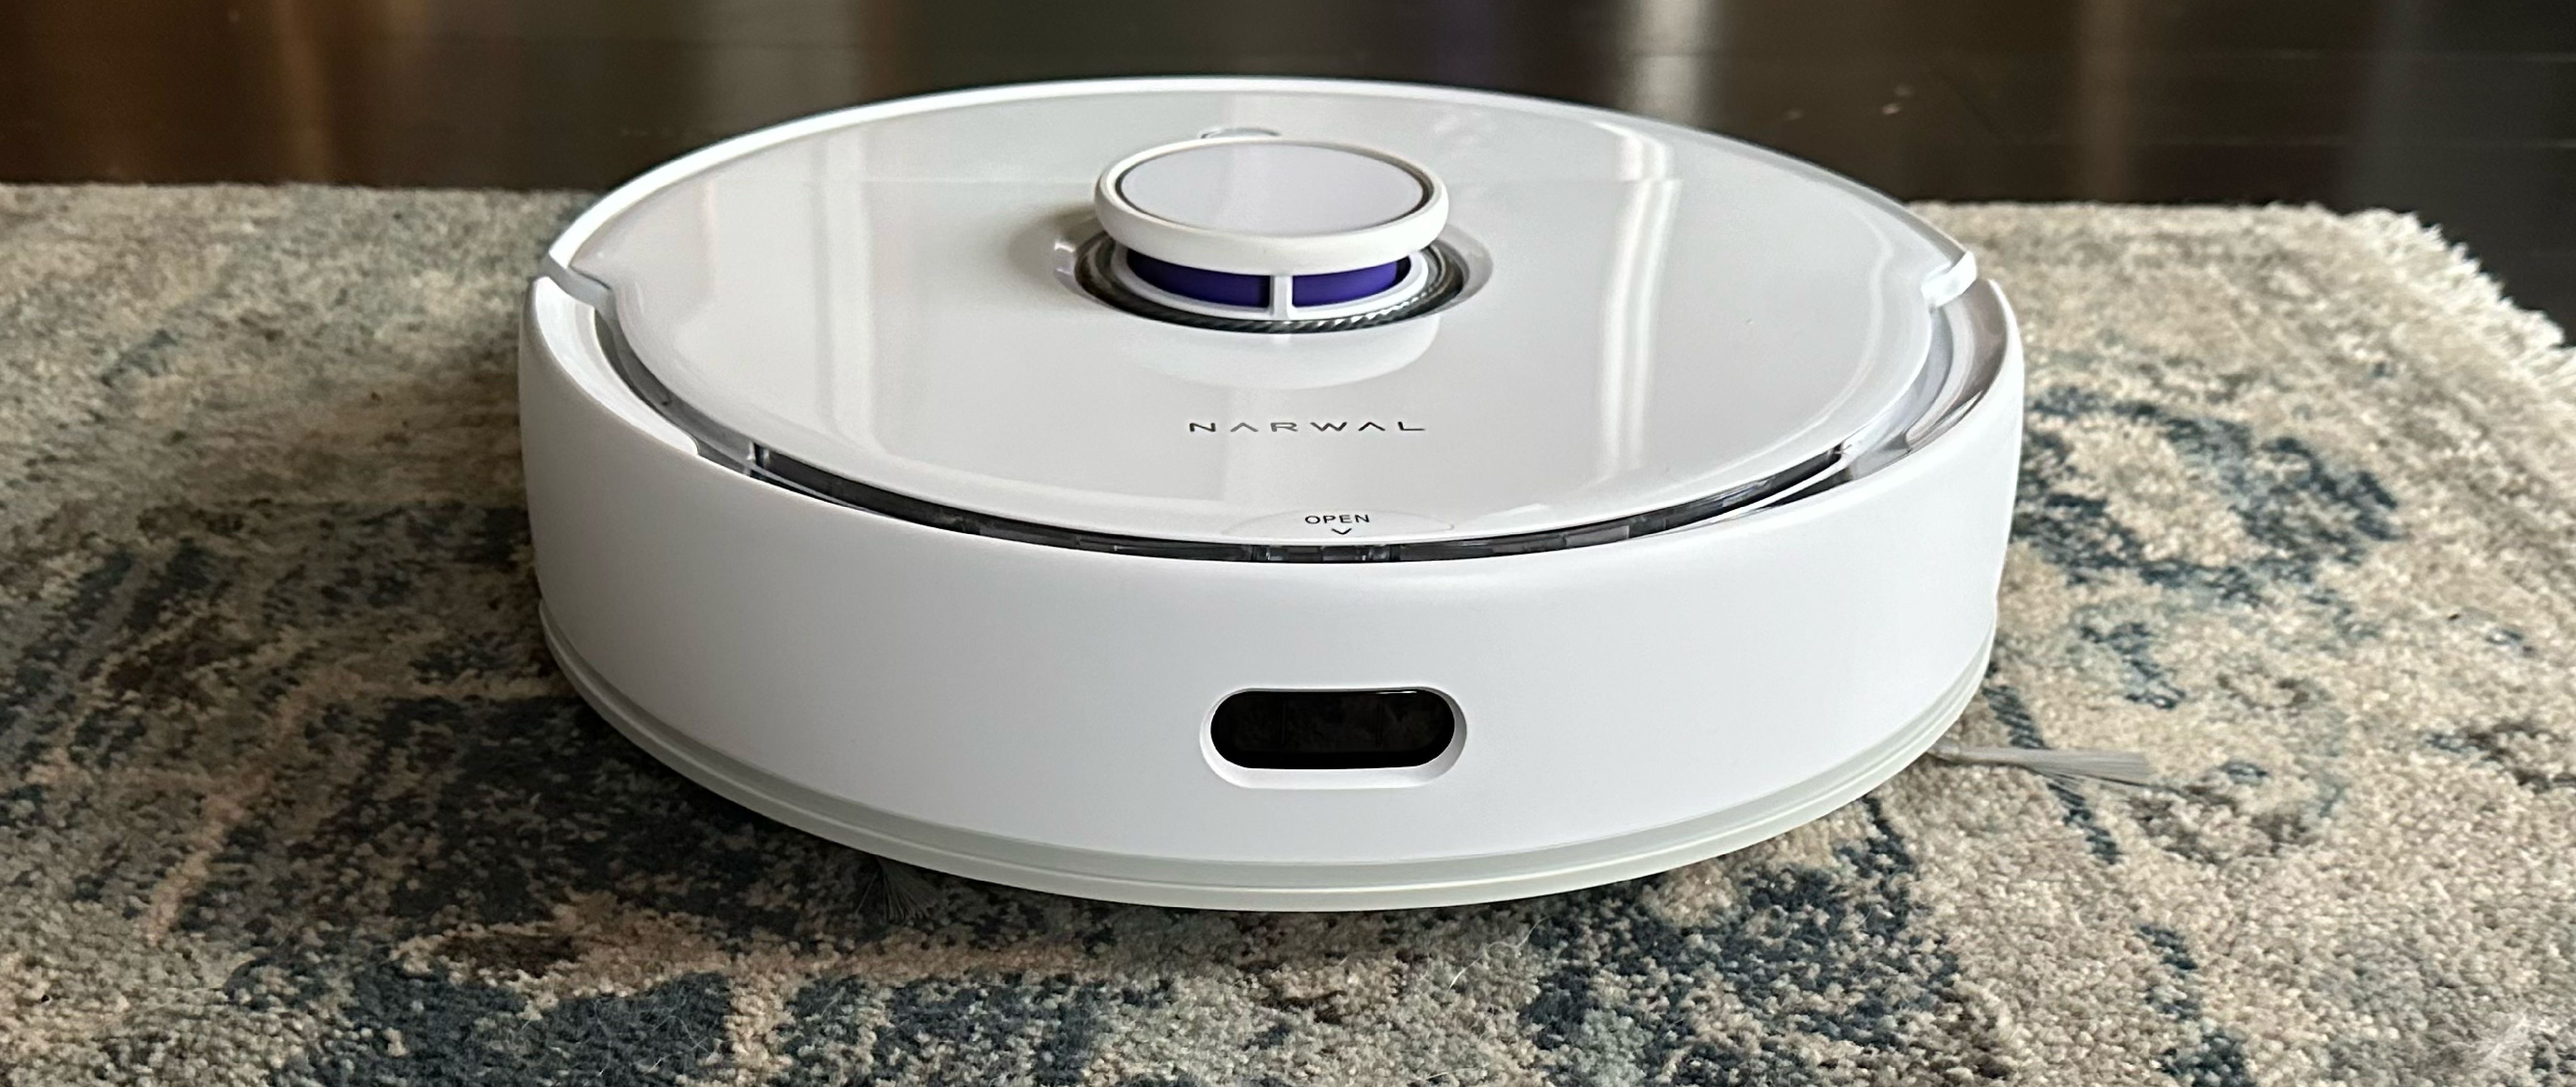 The Narwal Freo converted me to robot vacuums, and it's $320 off on   right now